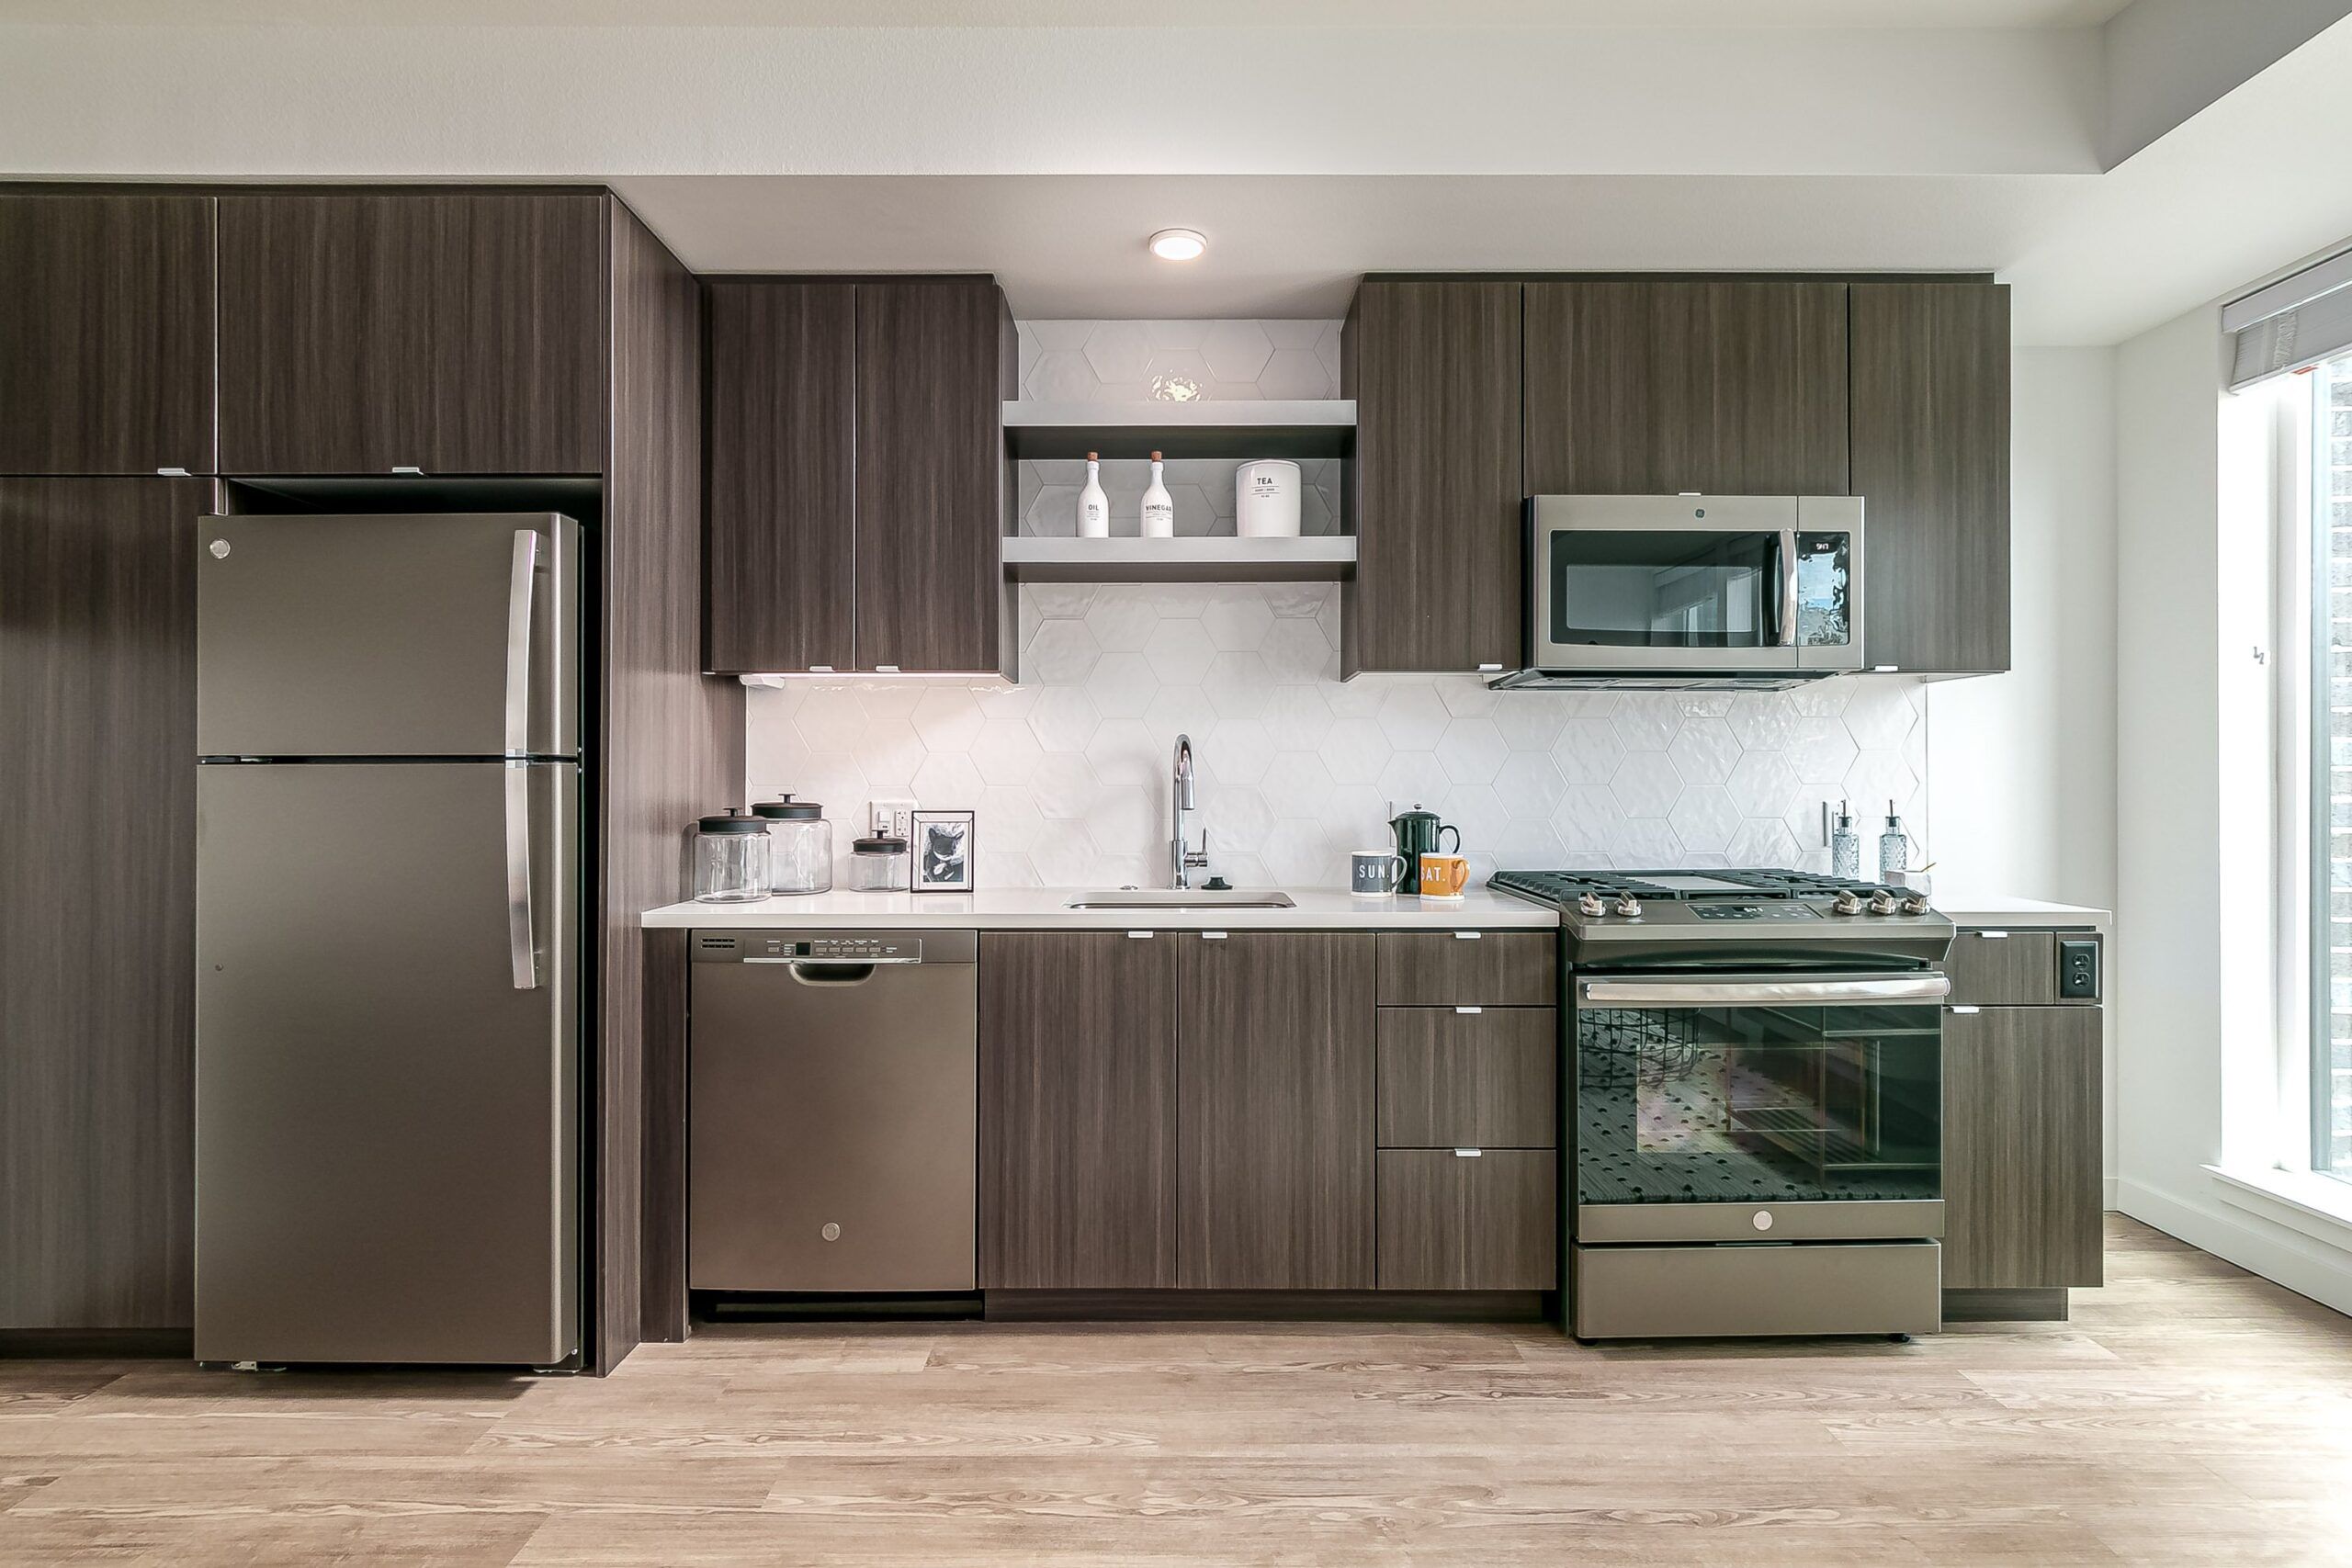 Alta Peak apartments kitchen interior with stainless steel appliances and wood cabinetry